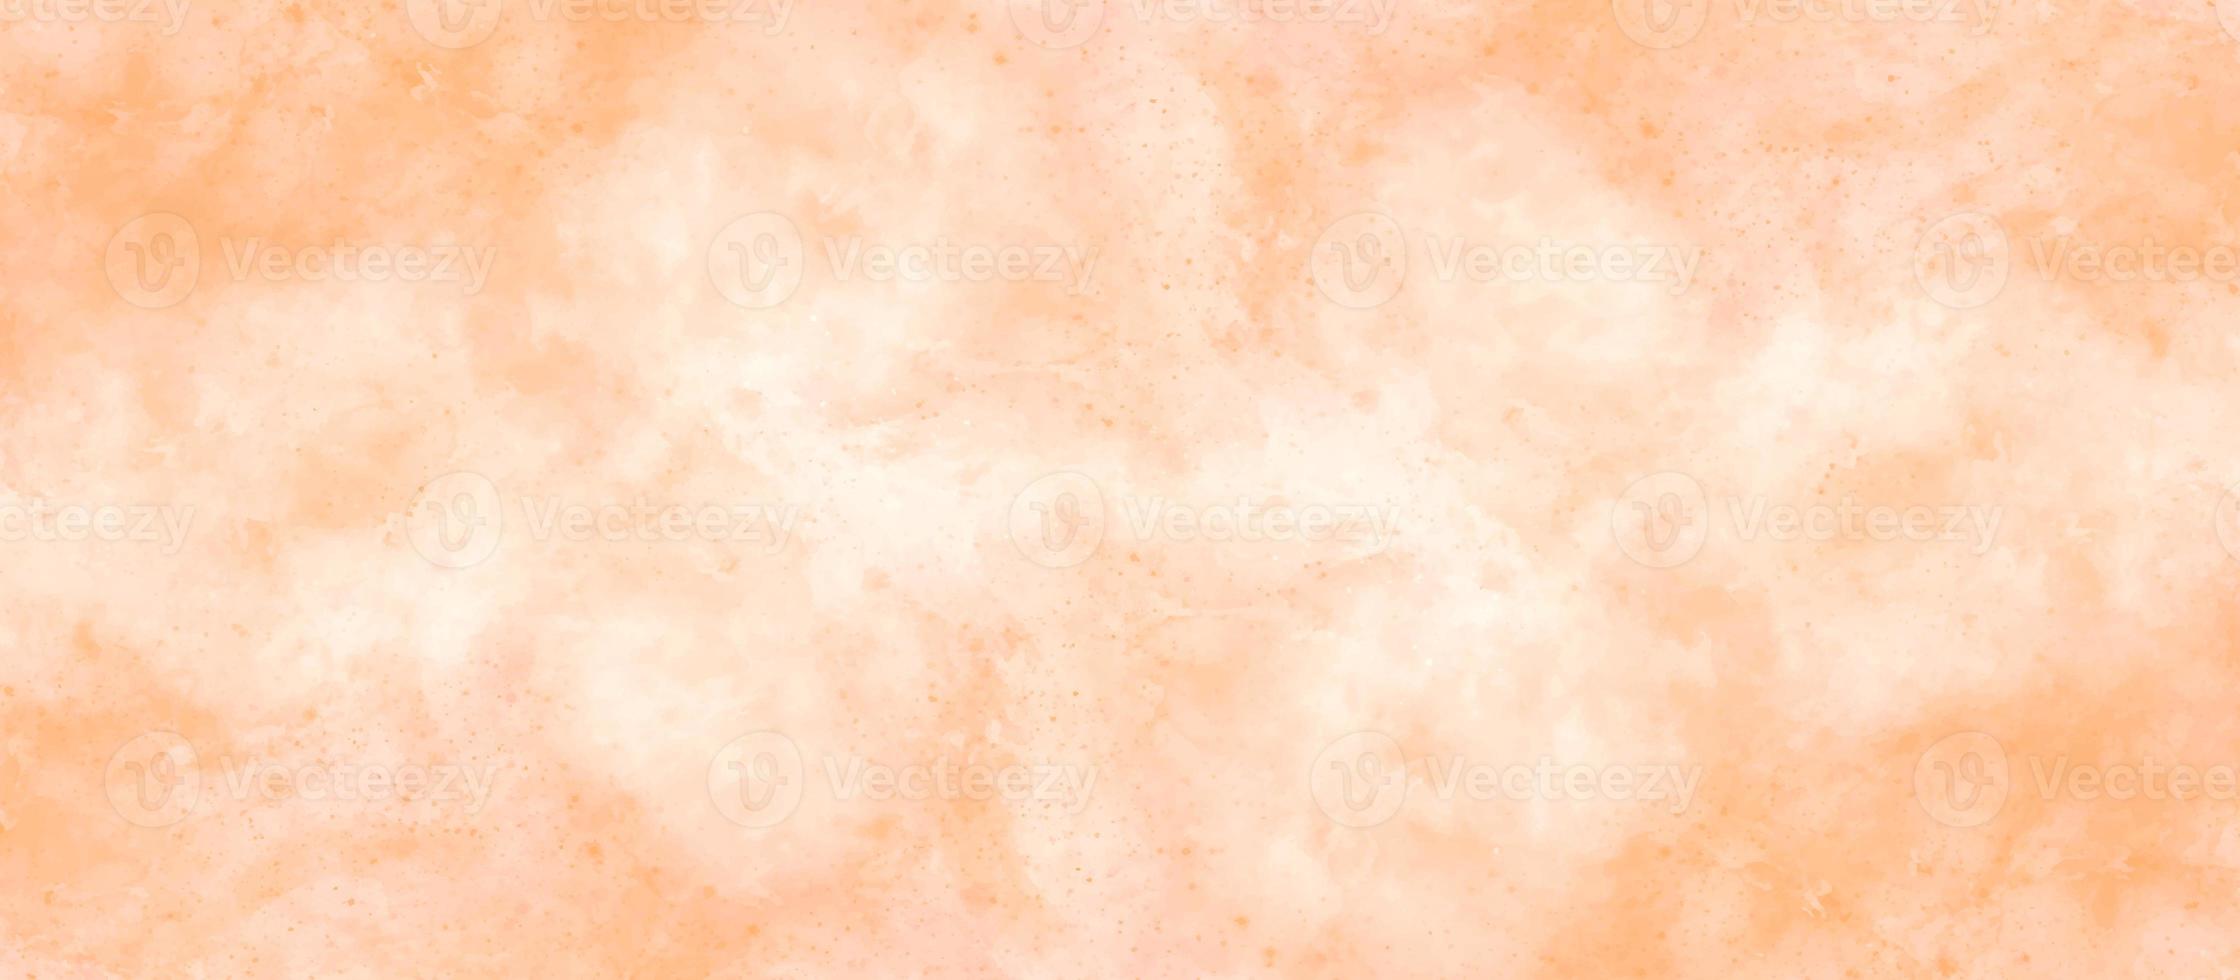 Light Pink Watercolor Background With Soft Texture Stock Photo